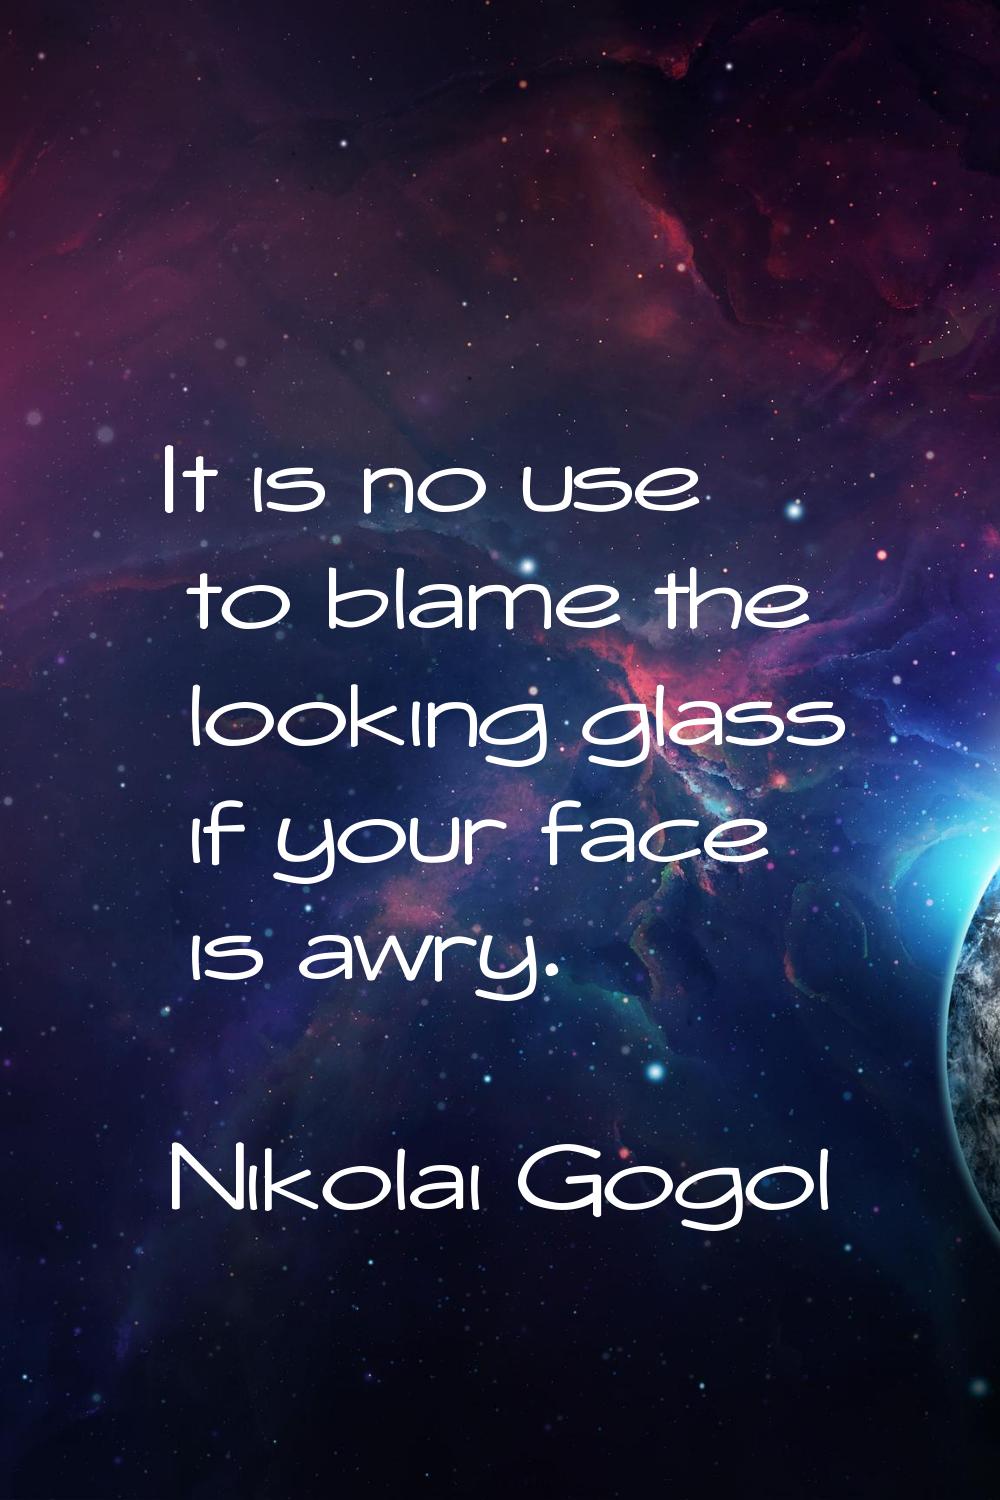 It is no use to blame the looking glass if your face is awry.